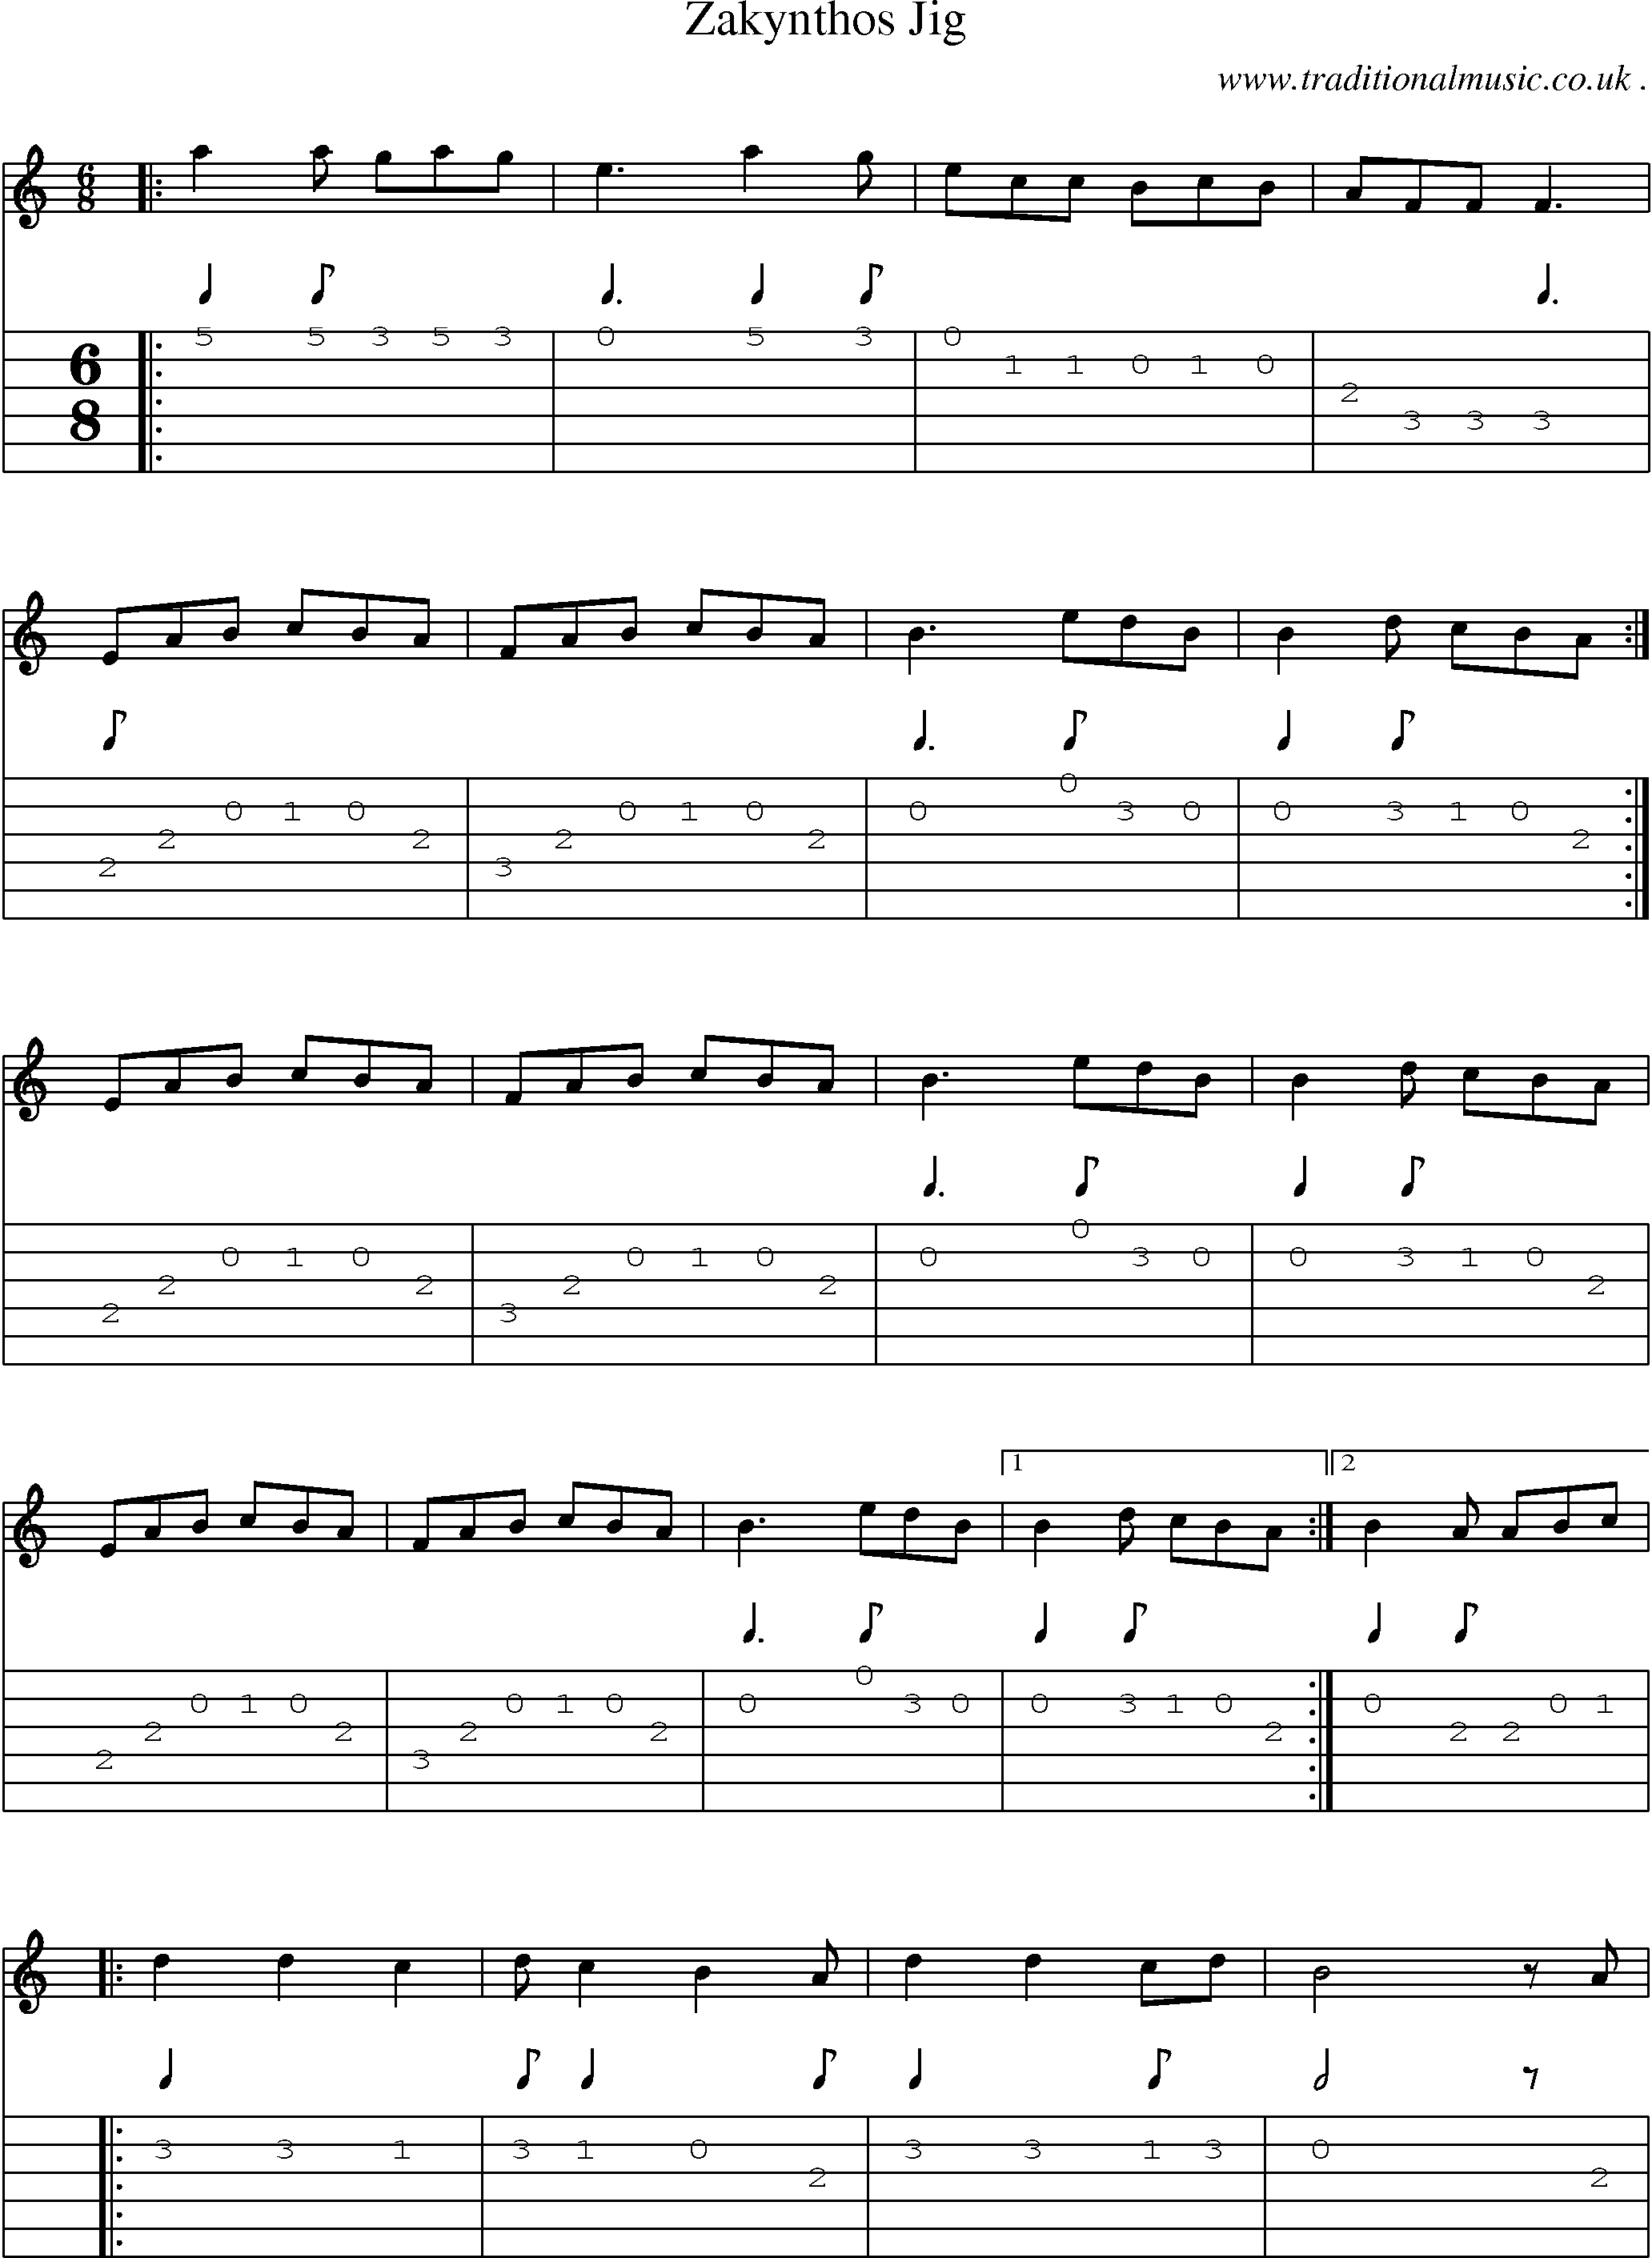 Music Score and Guitar Tabs for Zakynthos Jig